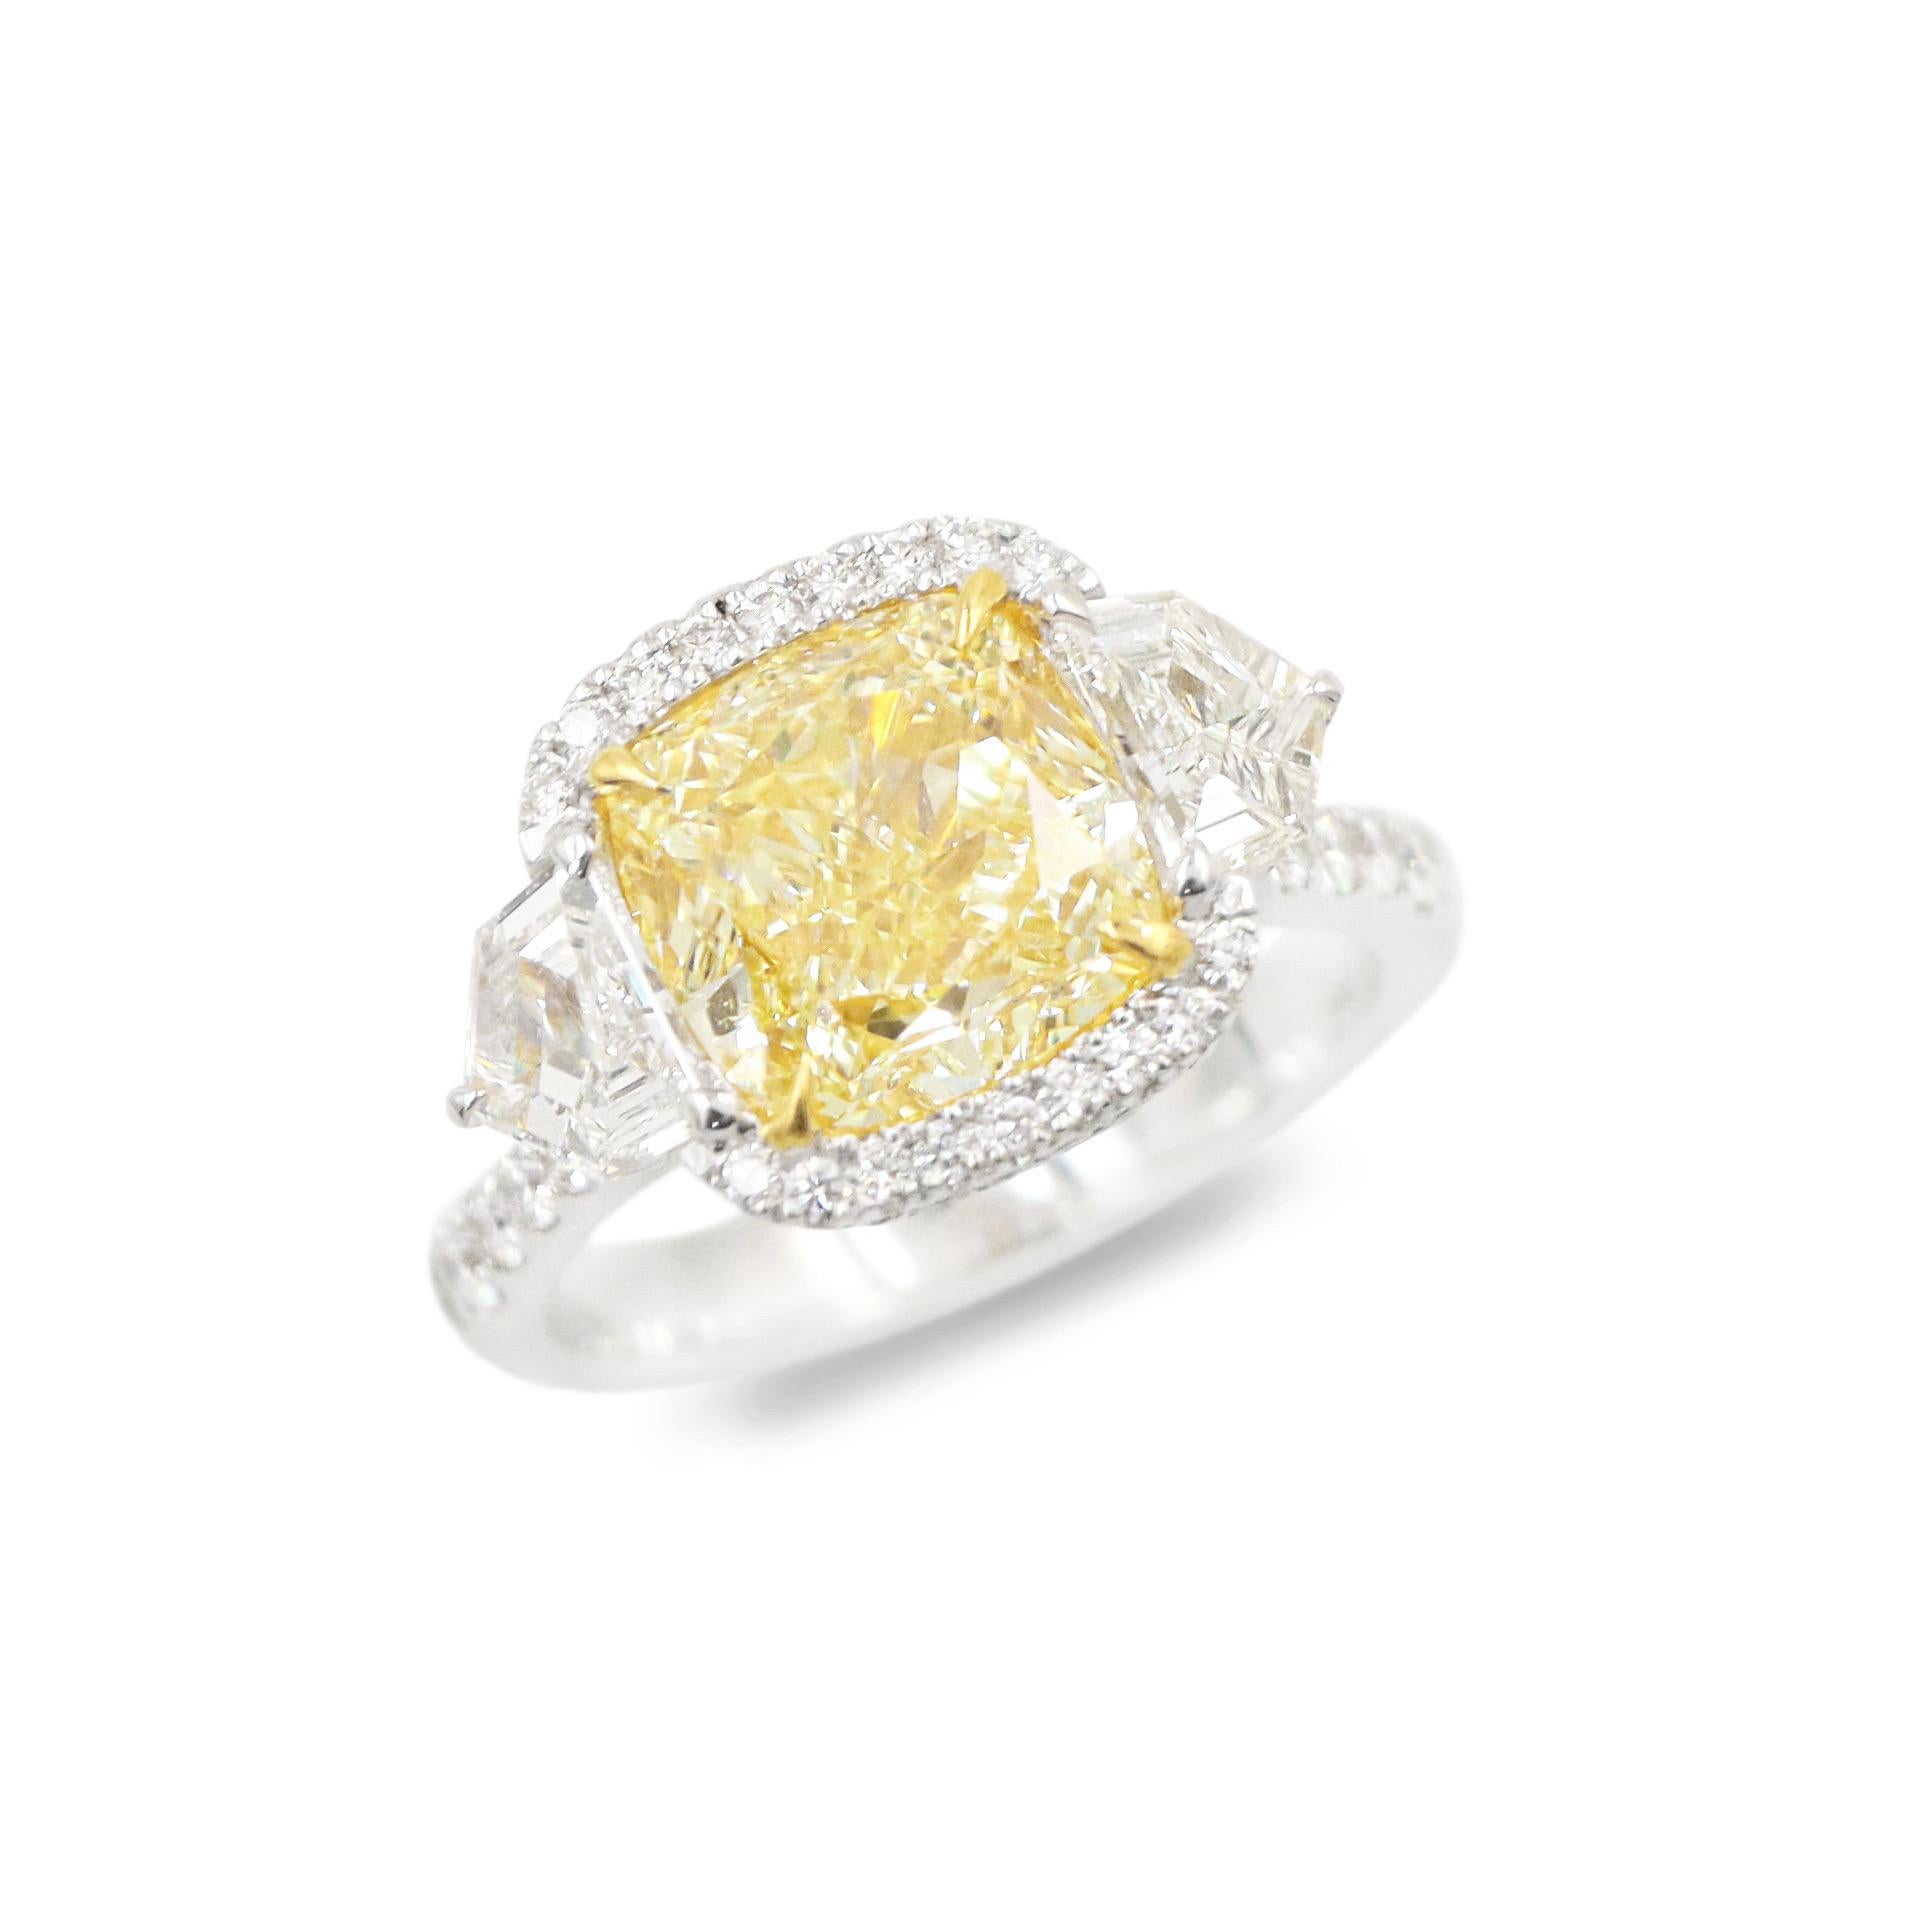 From Emilio Jewelry, a well known and respected wholesaler/dealer located on New York’s iconic Fifth Avenue, 

The focal point of this ring is the magnificent Gia Certified Natural Fancy Yellow Diamond in the center weighing alone over 5 carats.